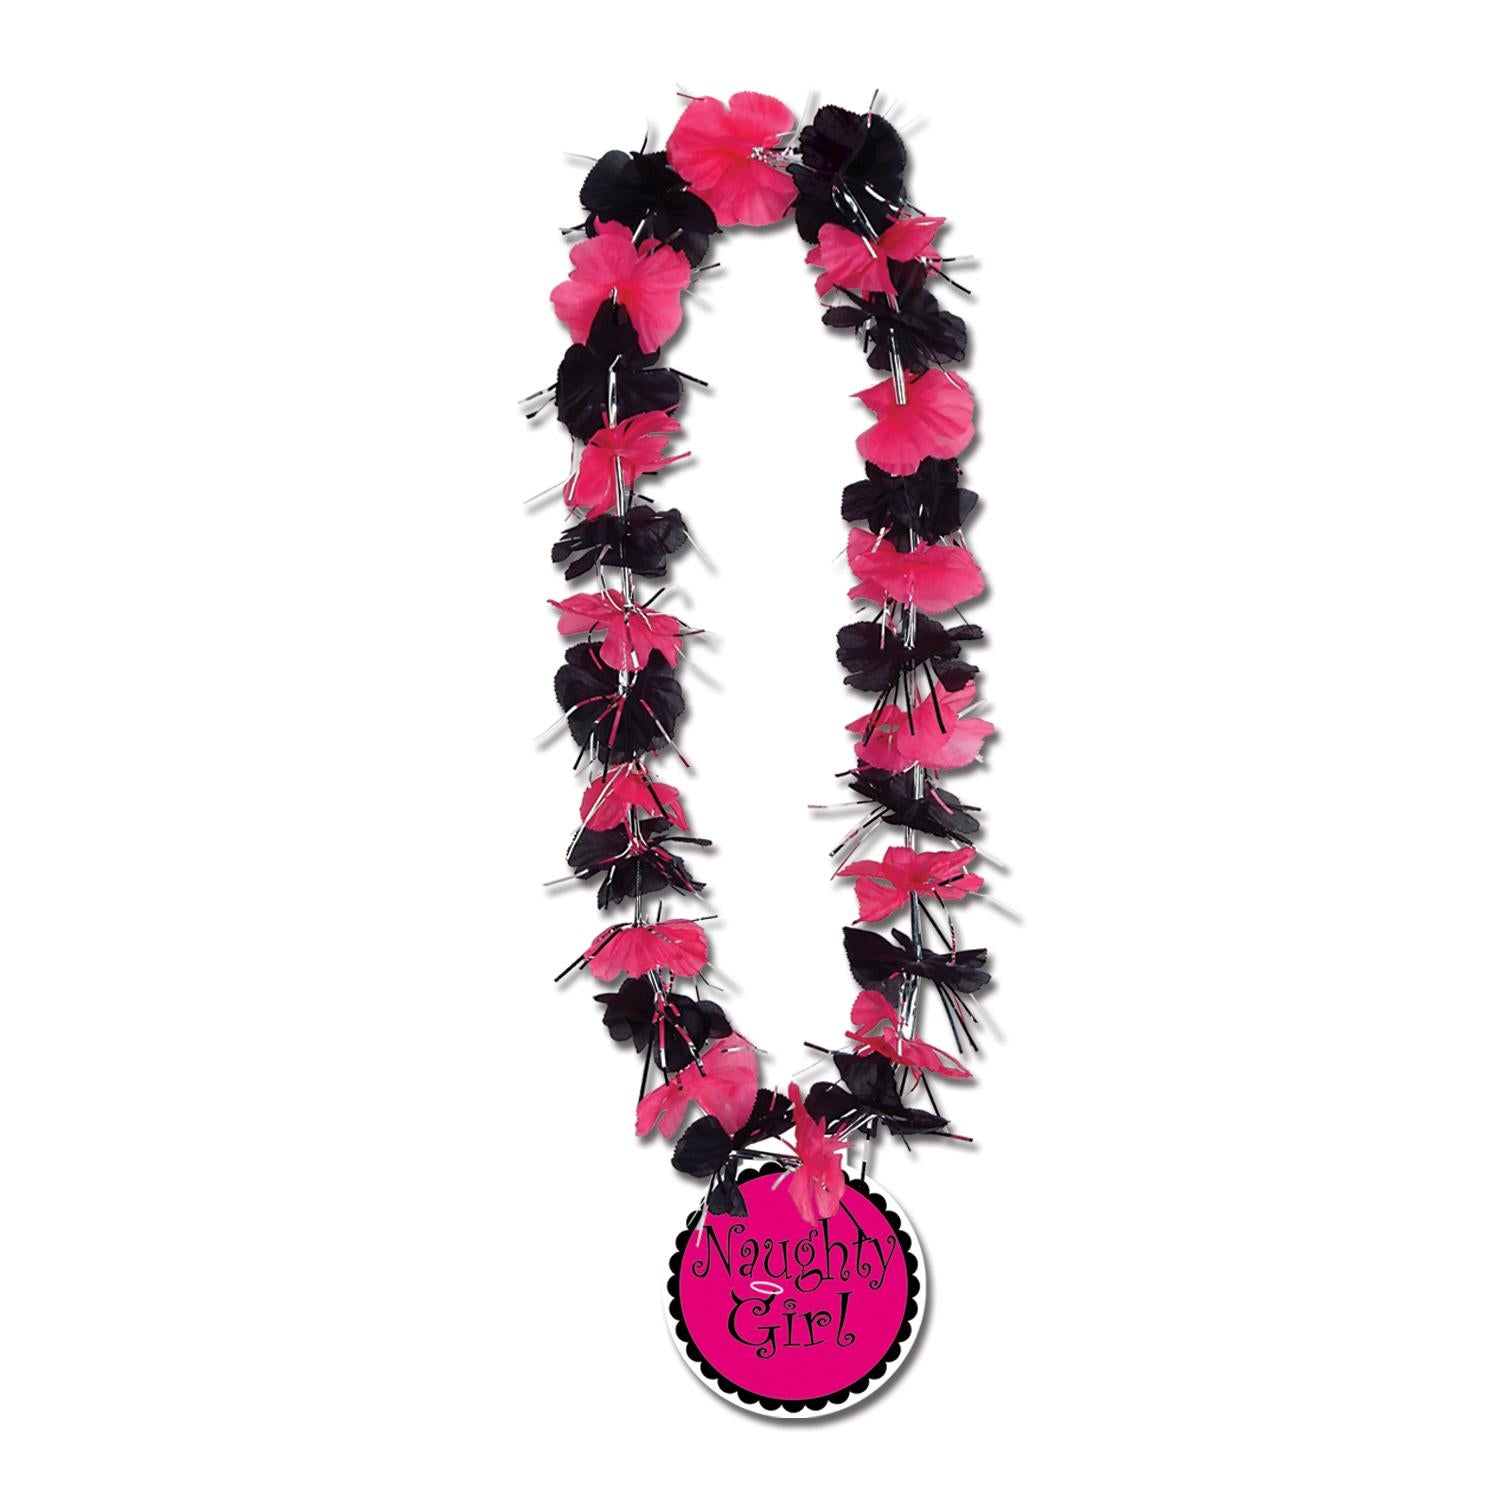 Beistle Bachelorette Party Lei with Naughty Girl Medallion